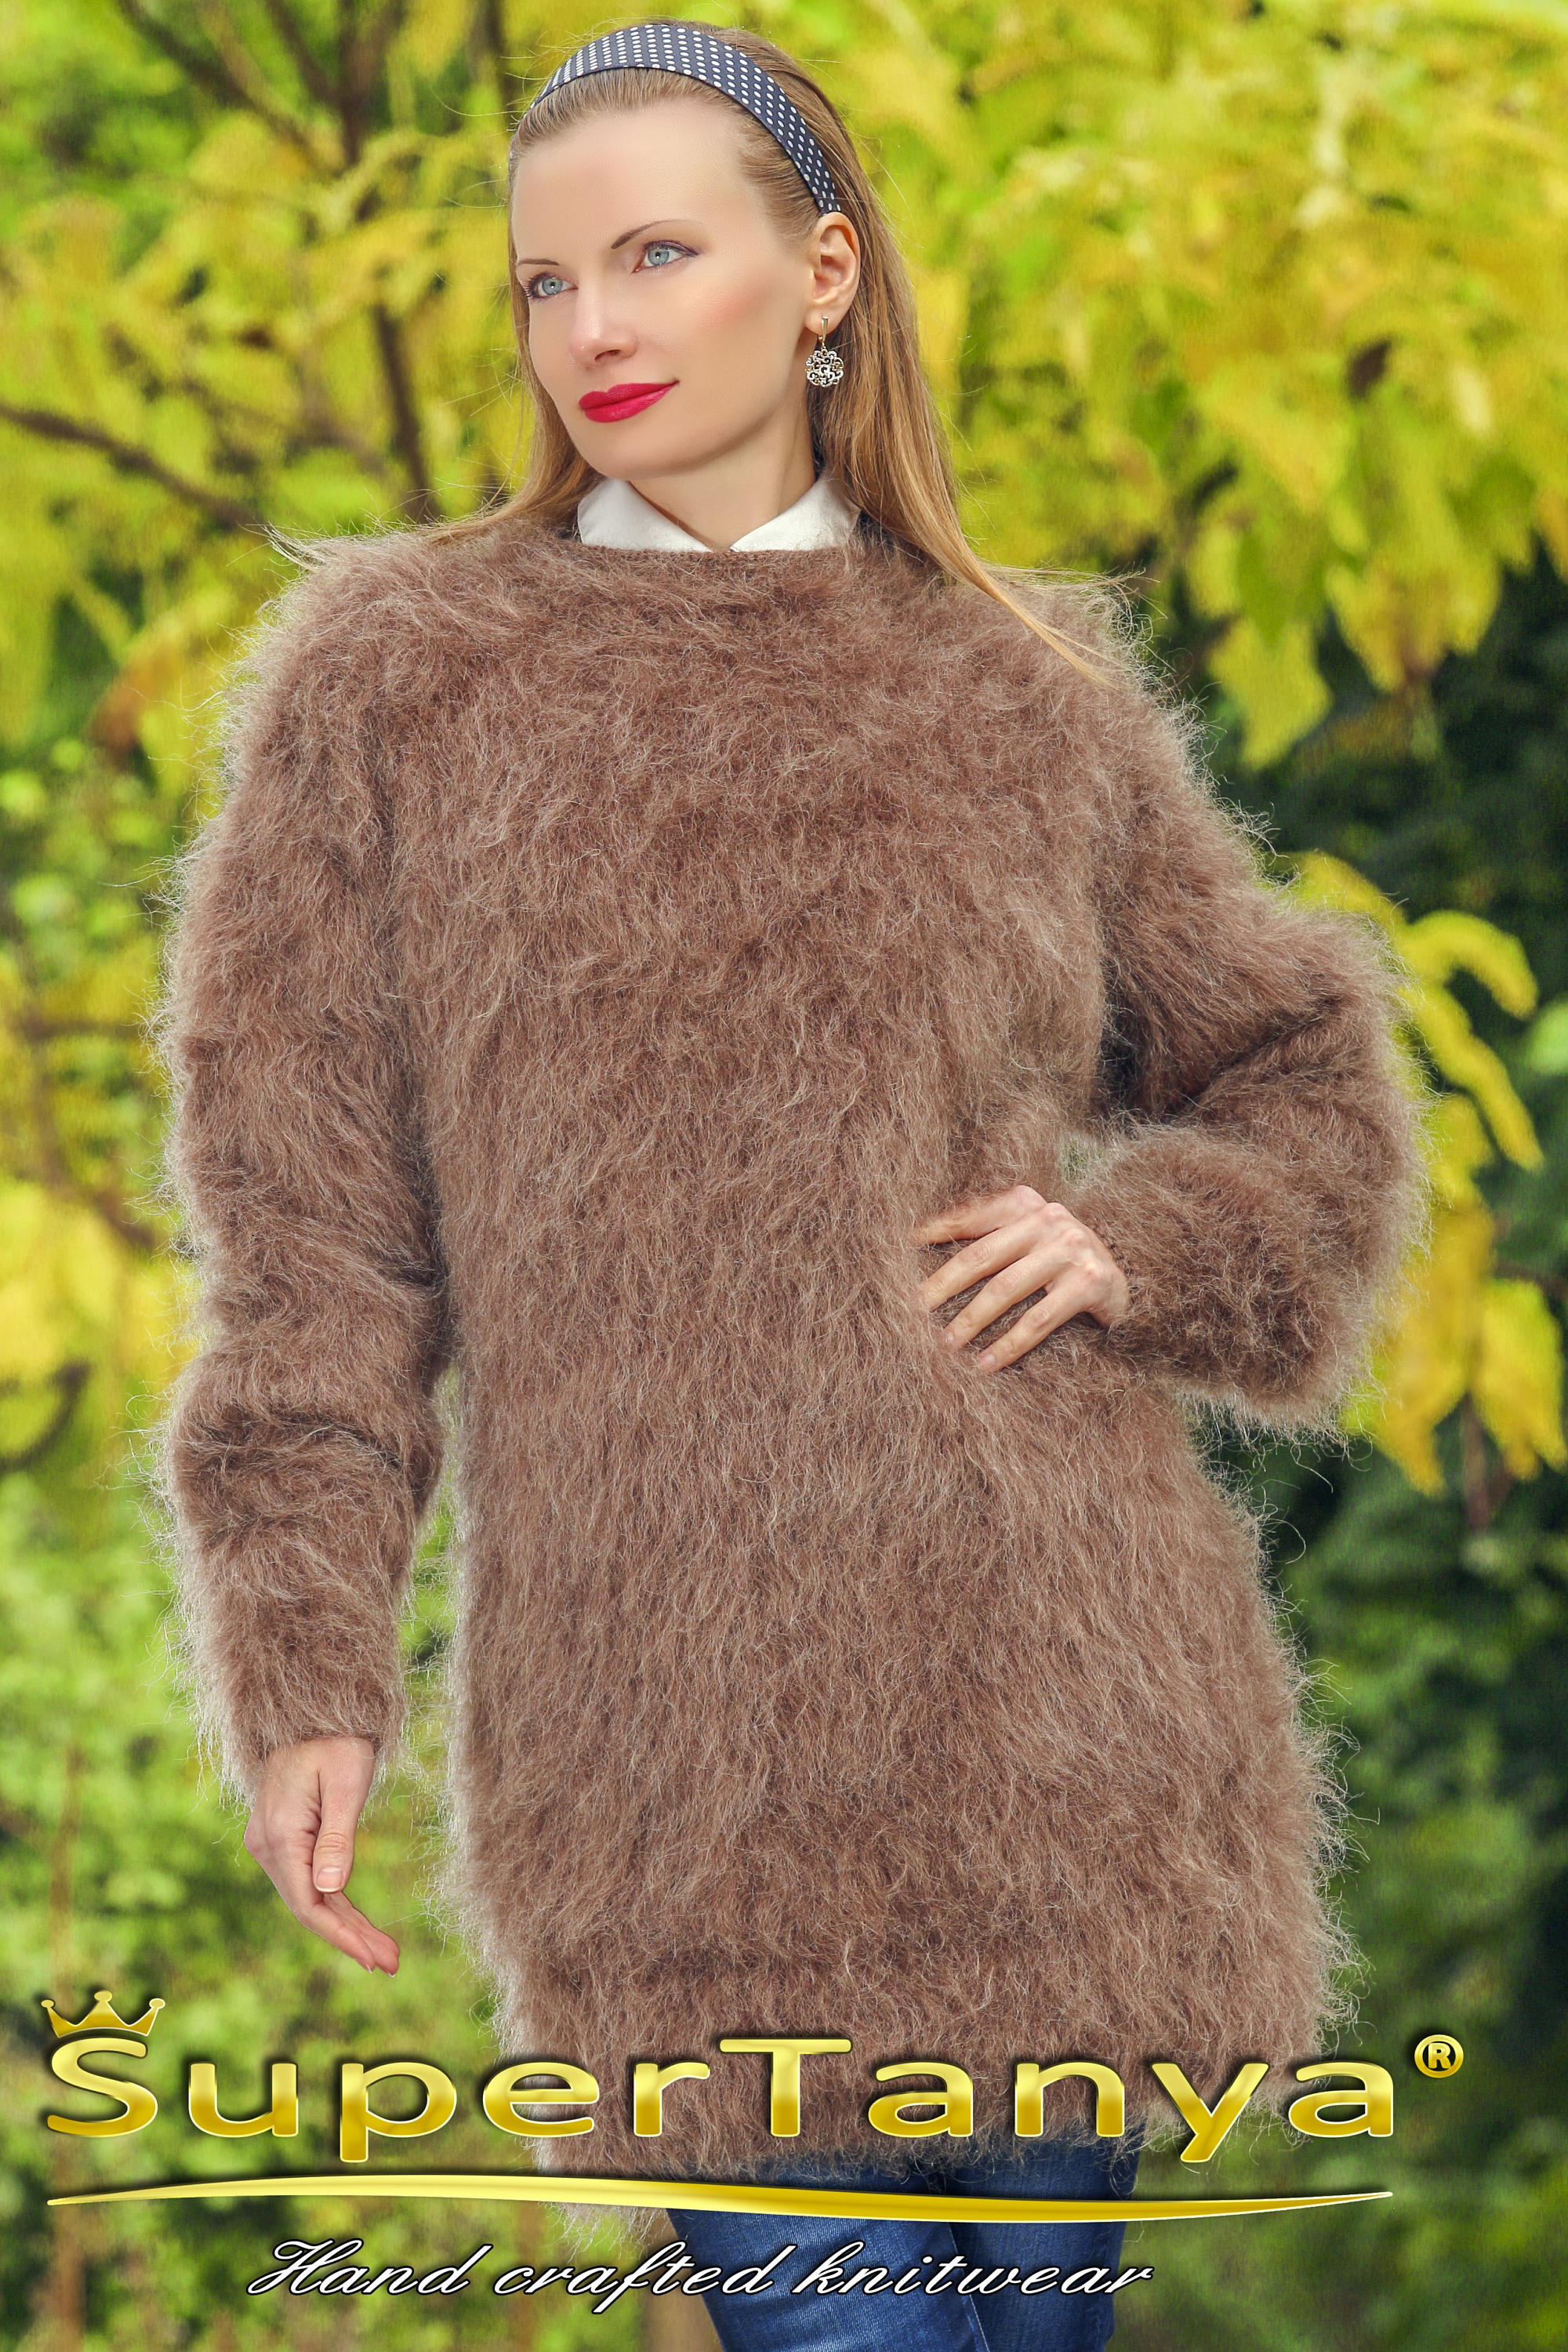 Handmade Brown Fuzzy Mohair Sweater Dress by Supertanya - Etsy